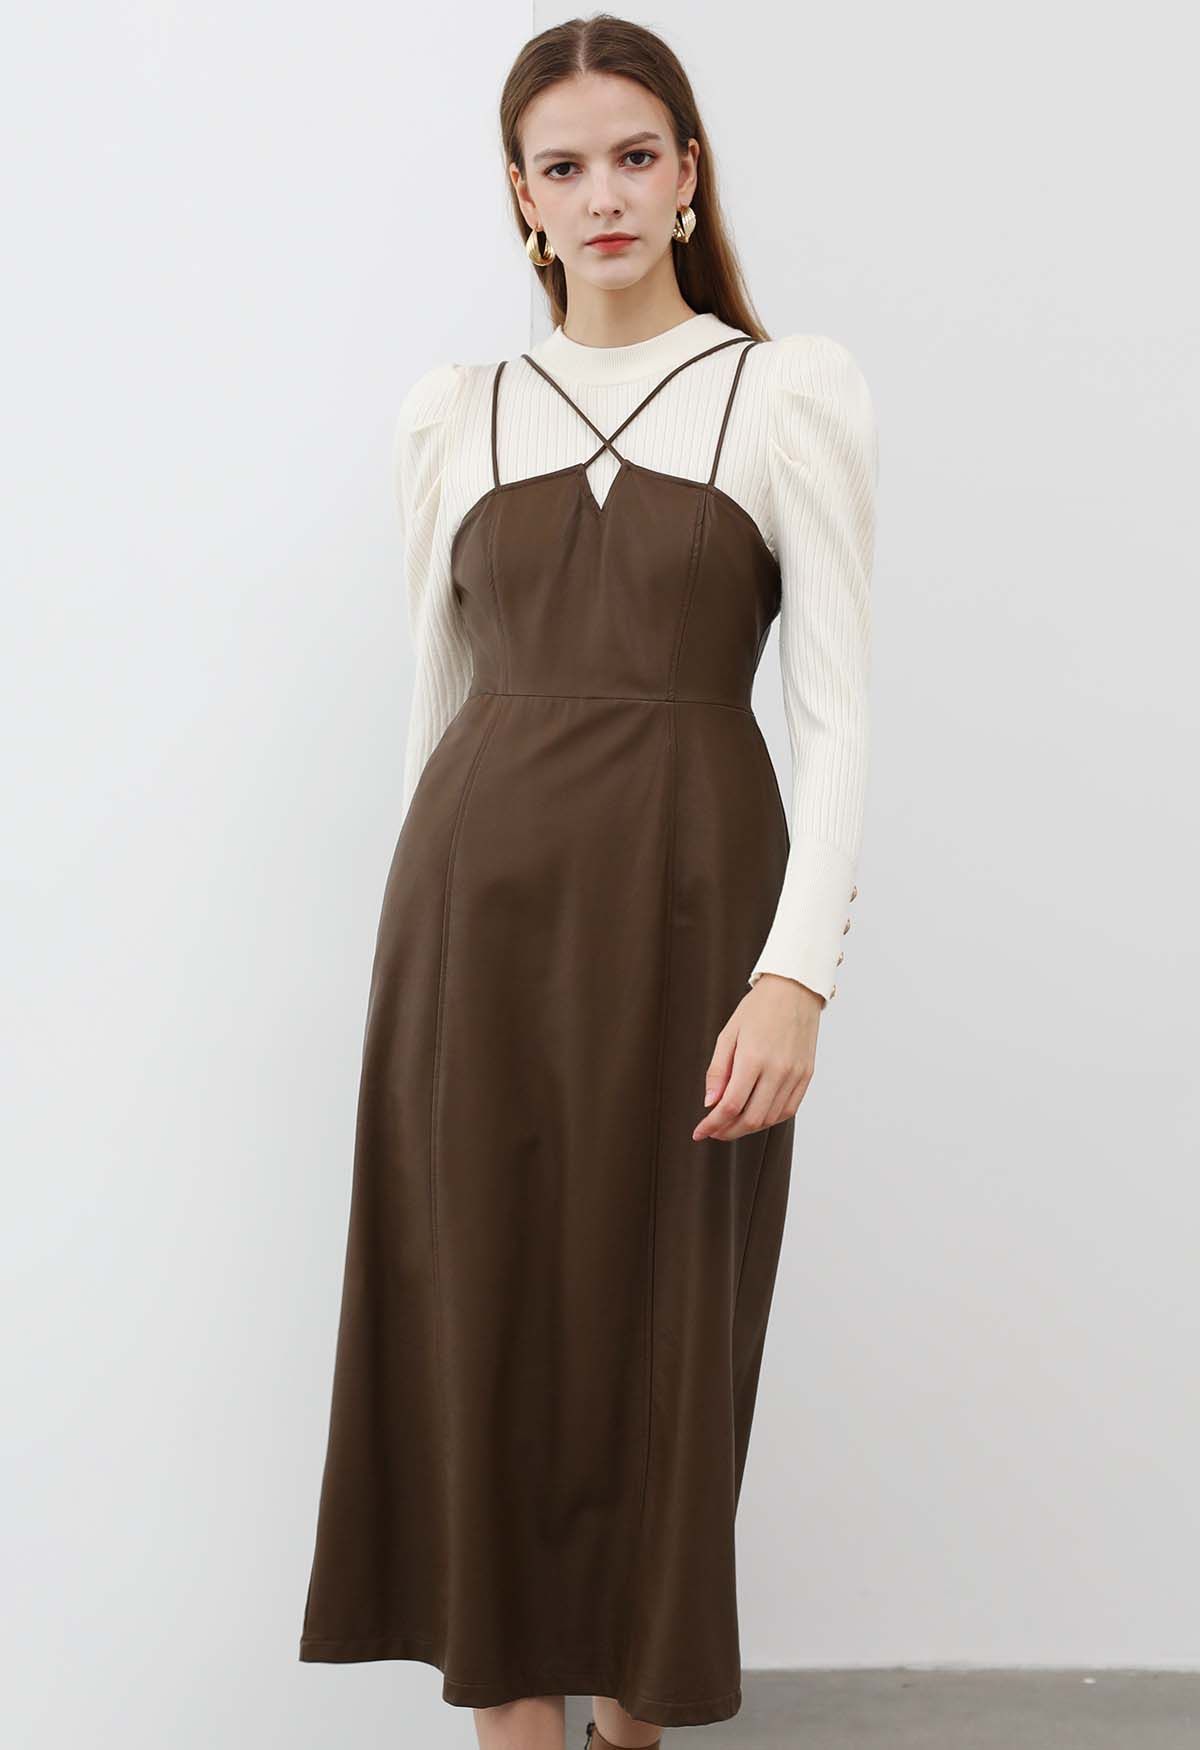 Faux Leather Spaghetti Cami Dress in Brown